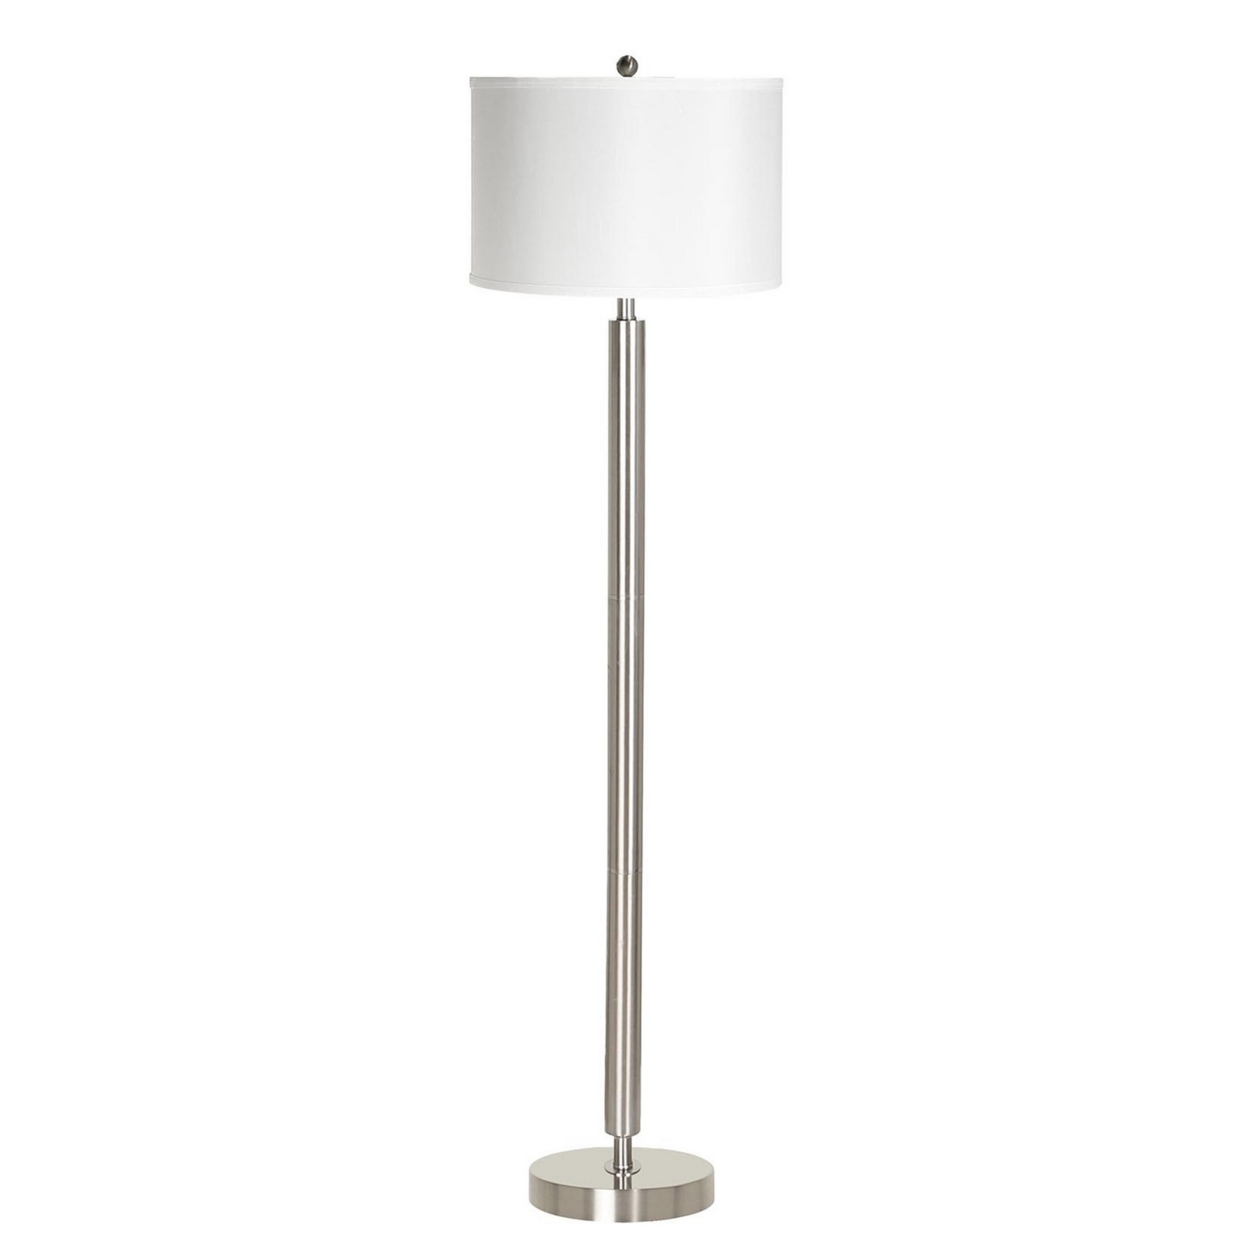 Metal Floor Lamp With Tubular Support And Push Through Switch, Silver- Saltoro Sherpi